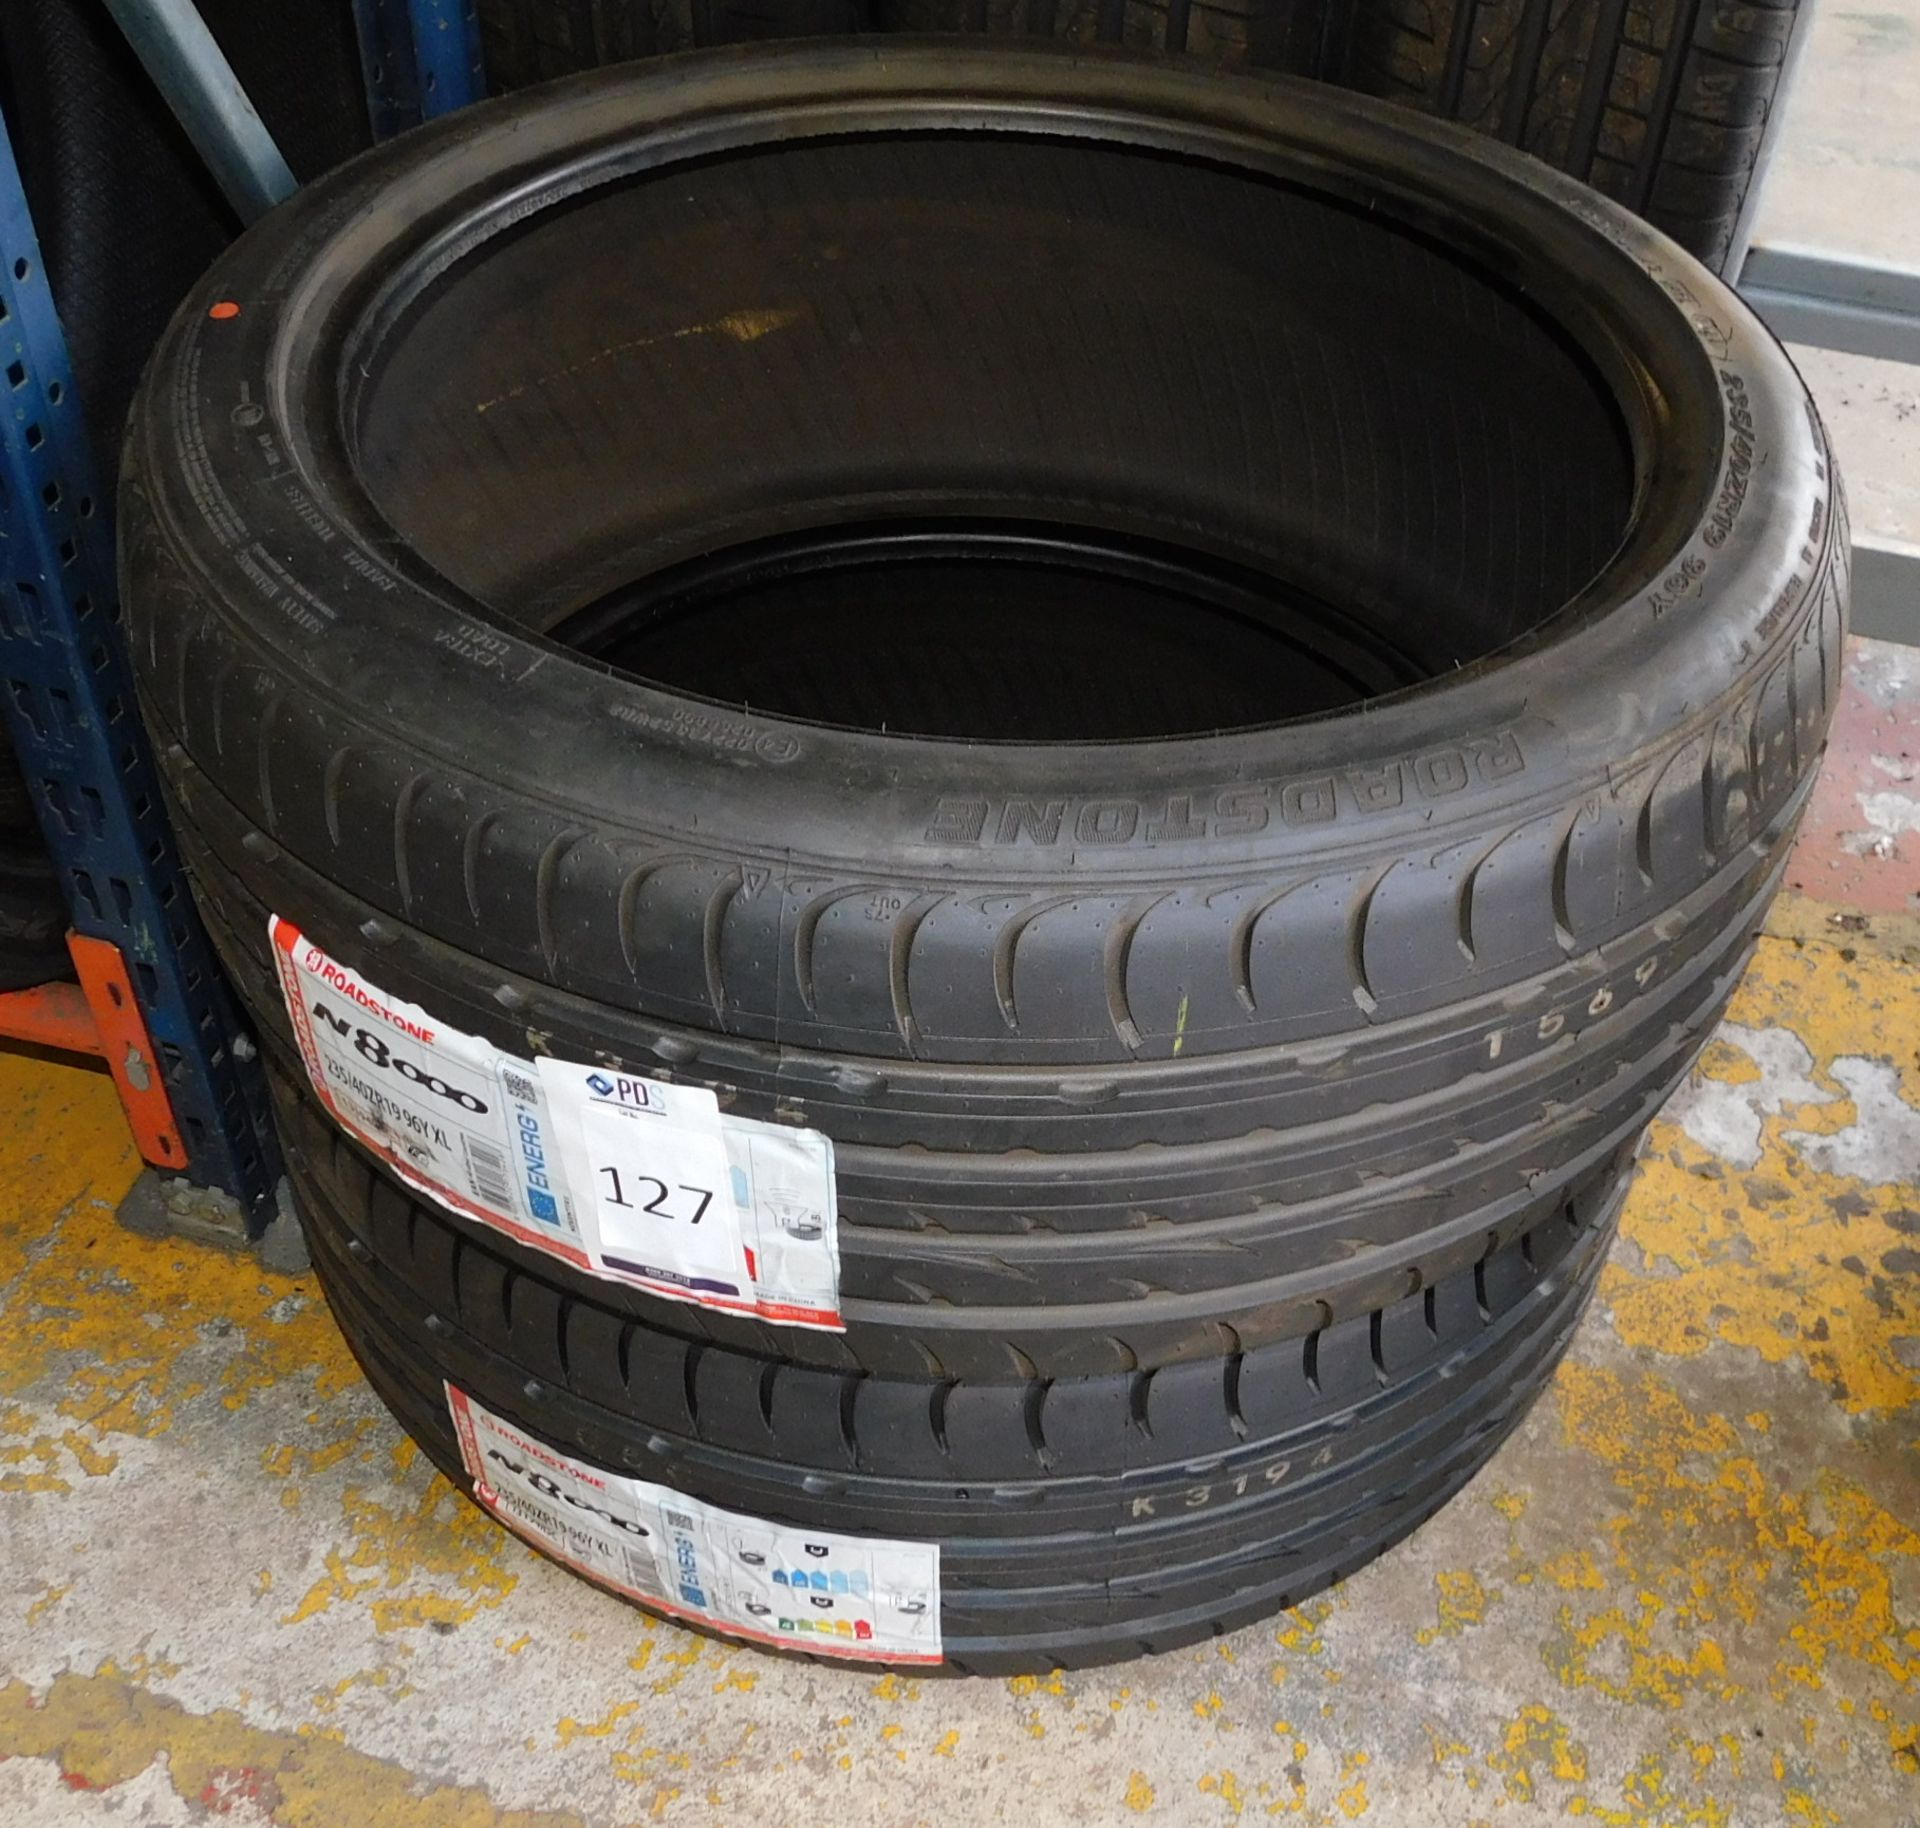 2 tyres, size 235/40 19 (Roadstone) (Location Northampton. Please Refer to General Notes)